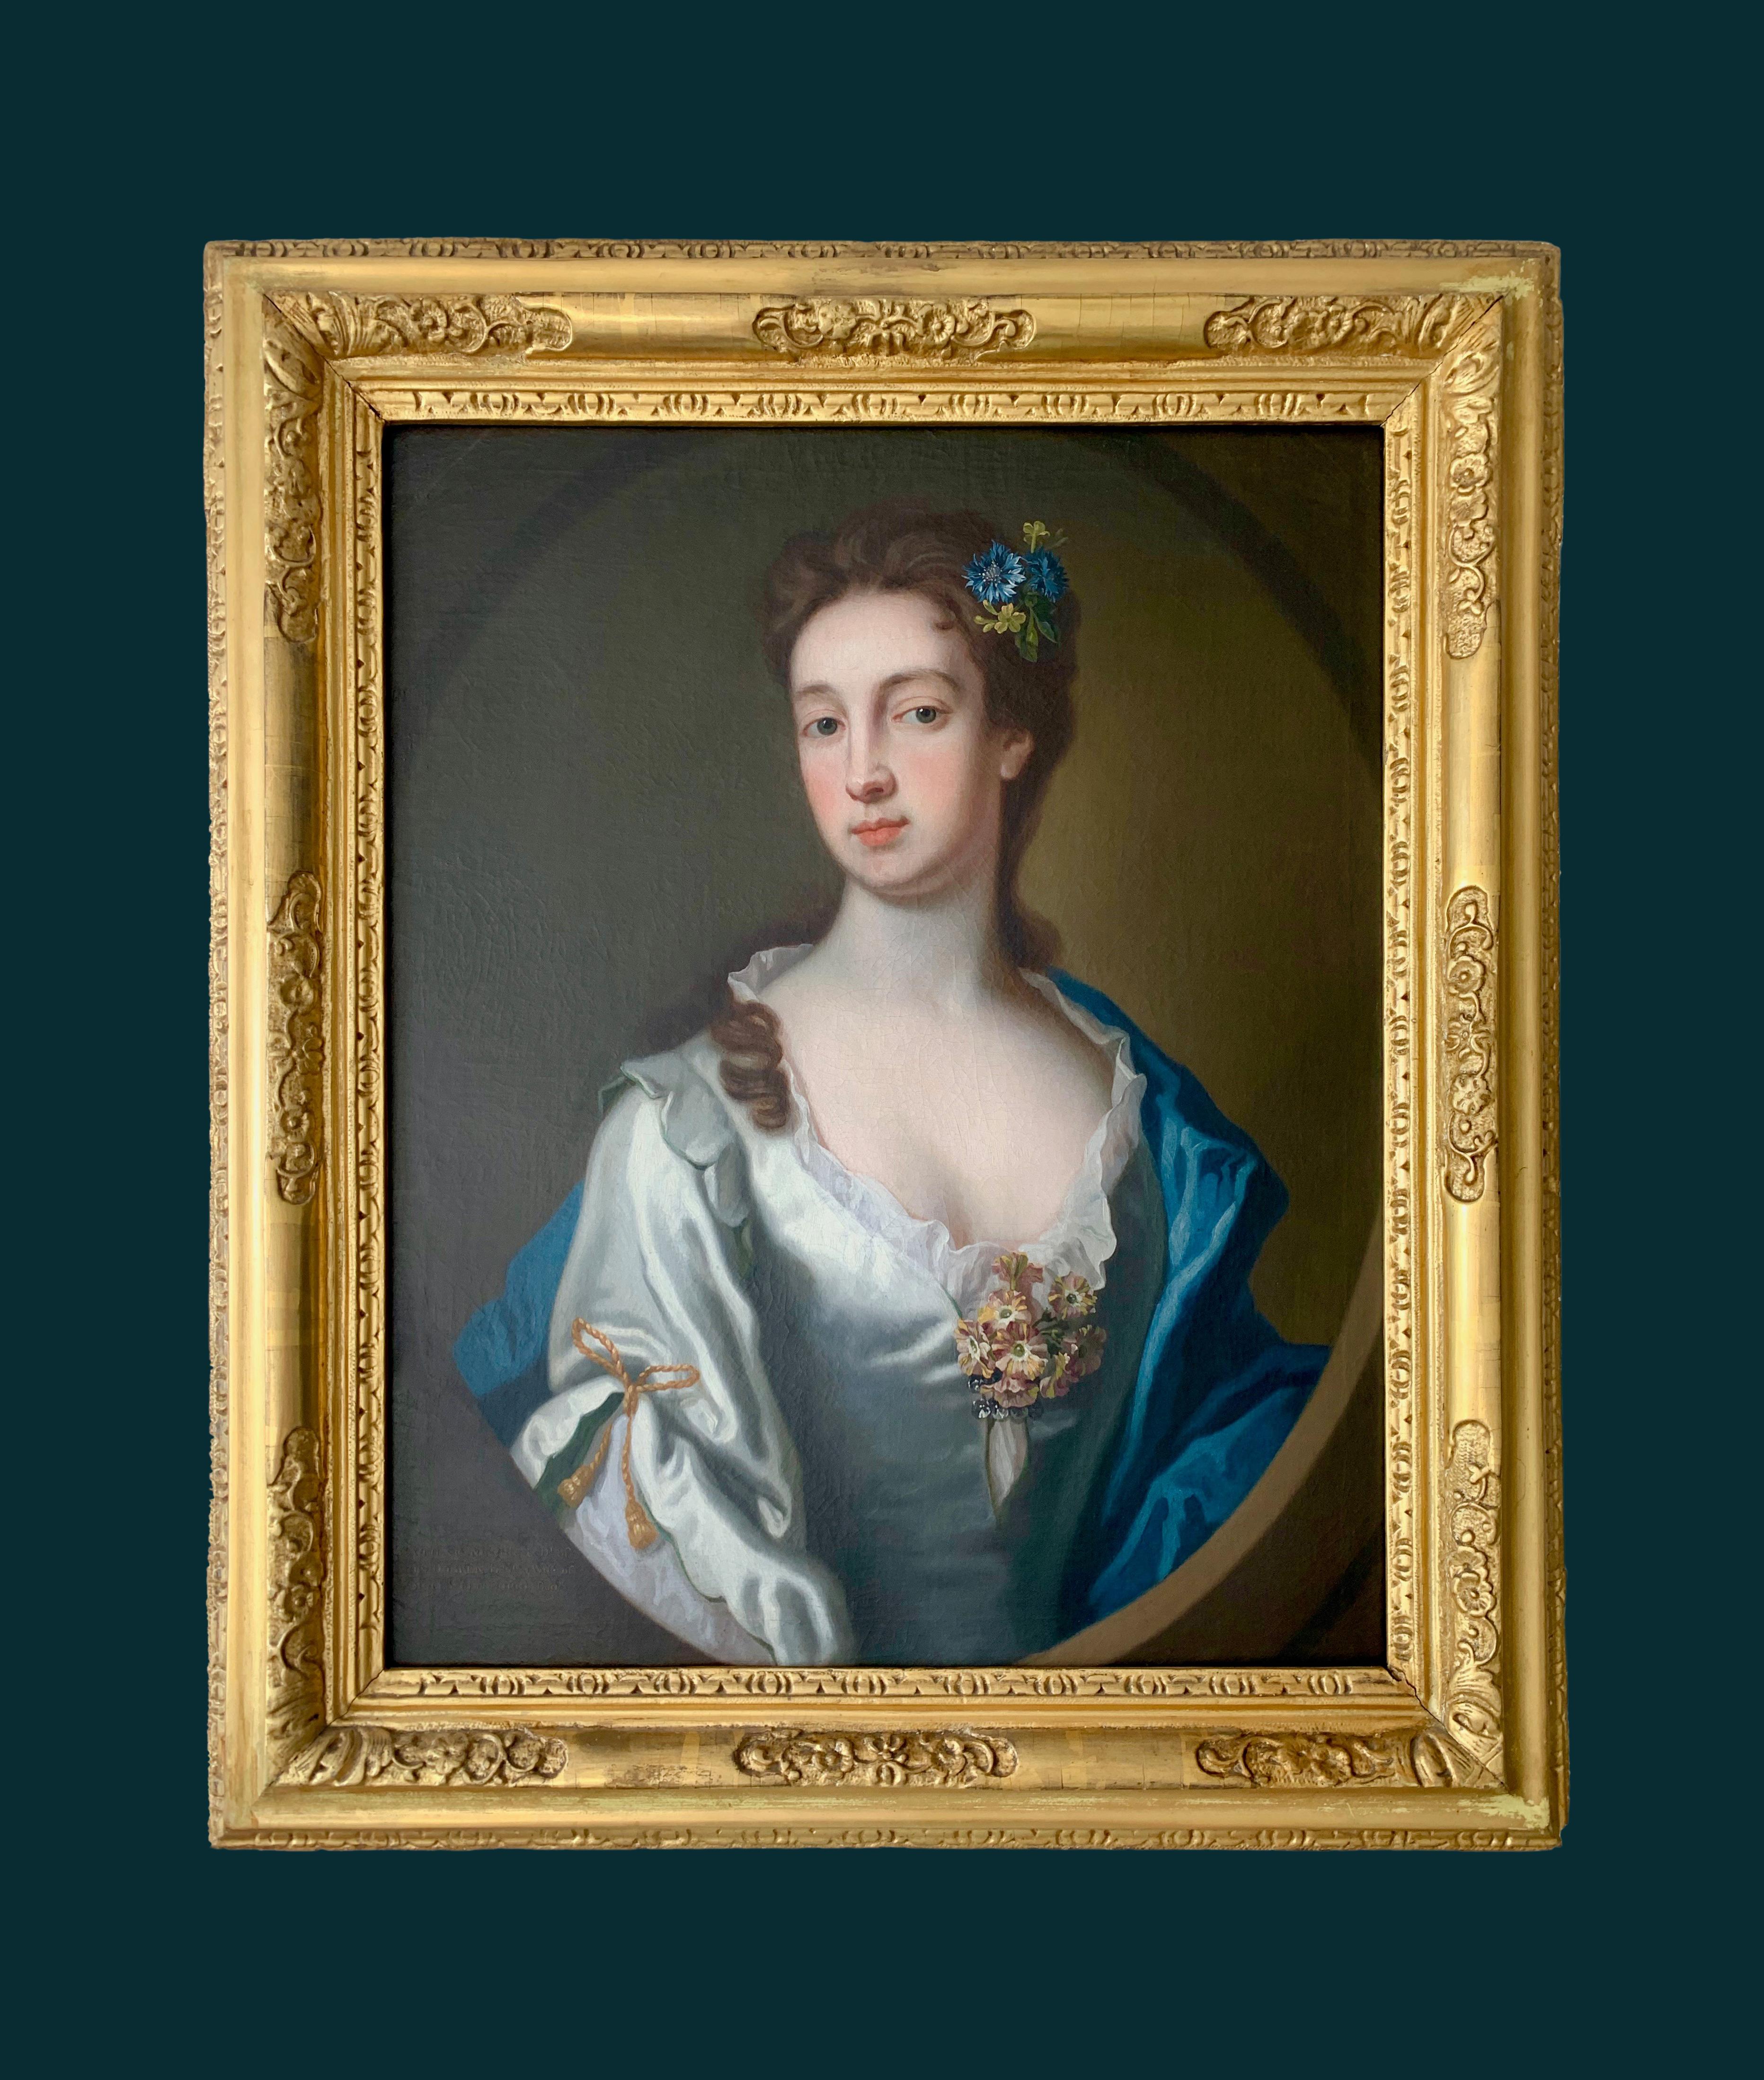 18th Century English Portrait of a Lady in a White and Blue Silk Dress. - Brown Interior Painting by Attributed to George Knapton